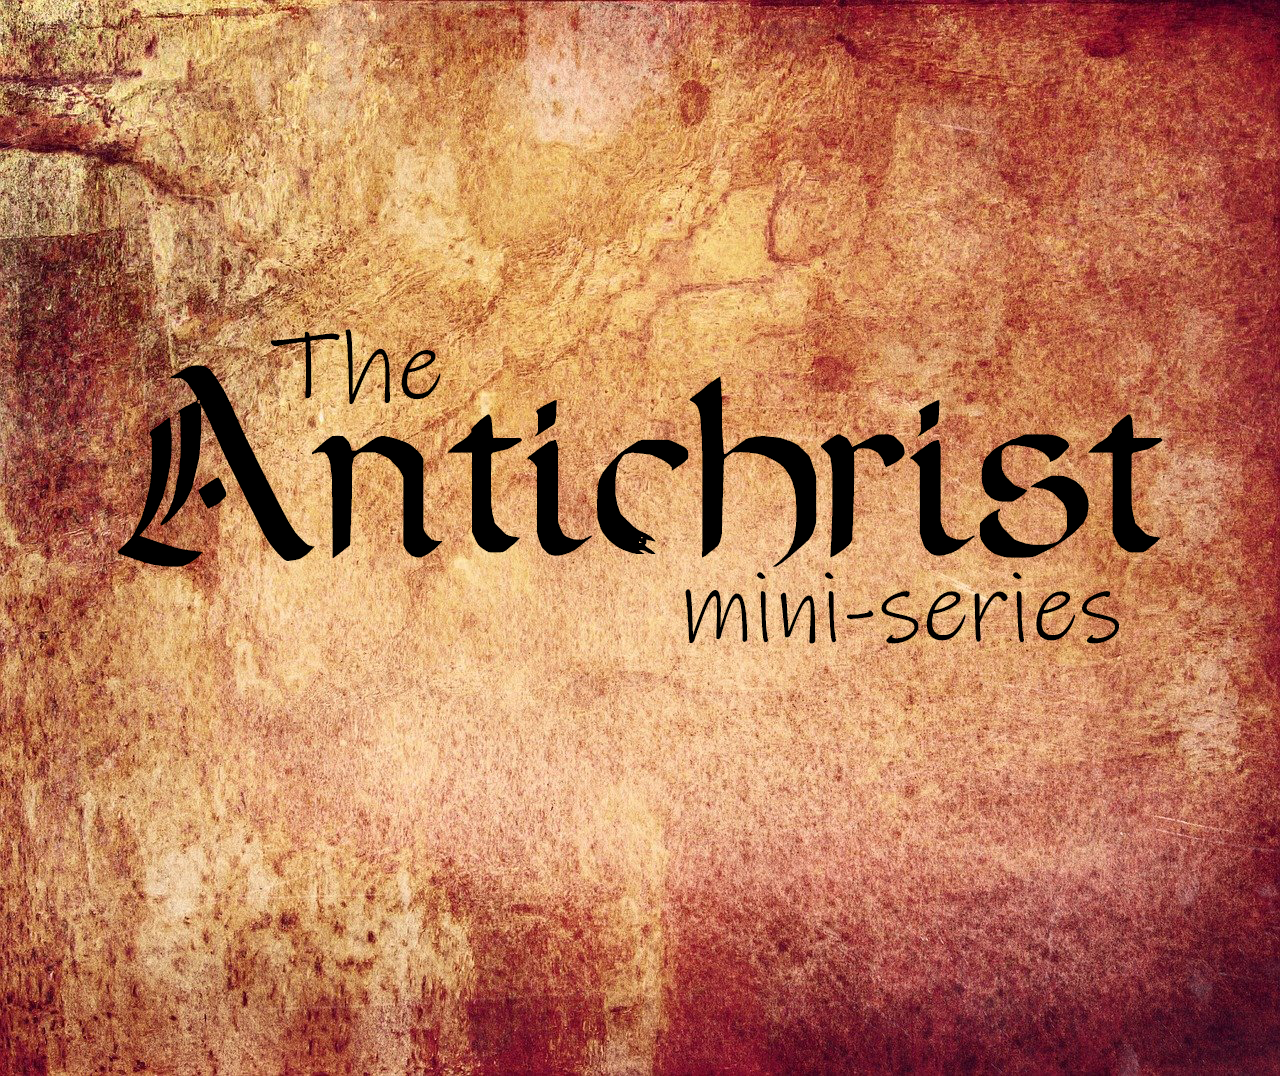 #2 The Rise of Antichrist